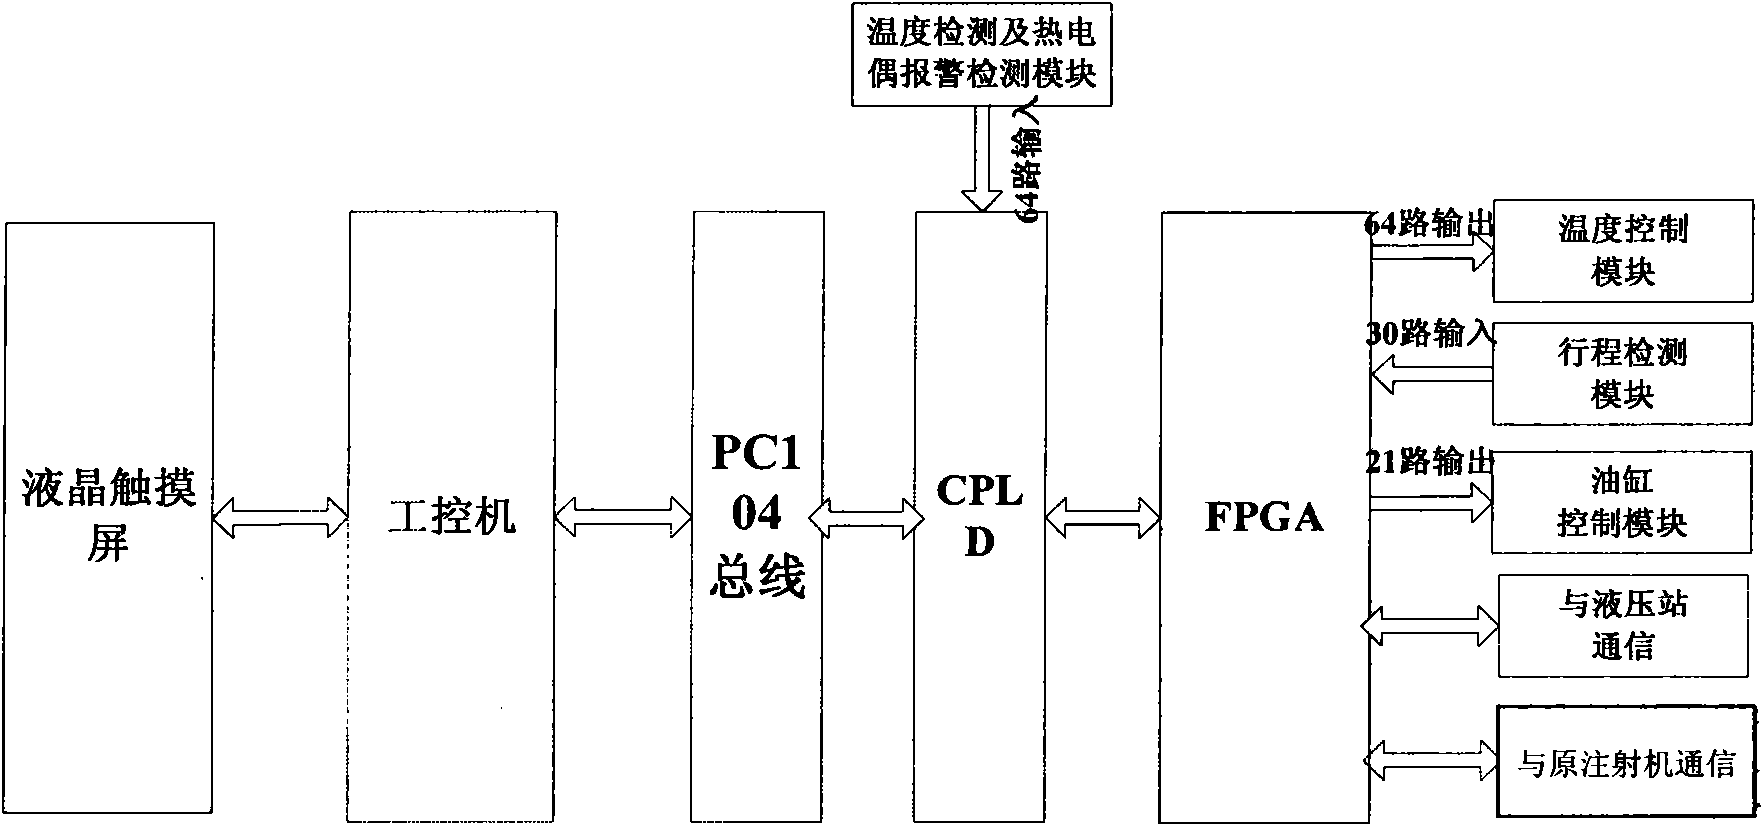 Externally connected control system of in-mould laminating special injection molding machine and method thereof